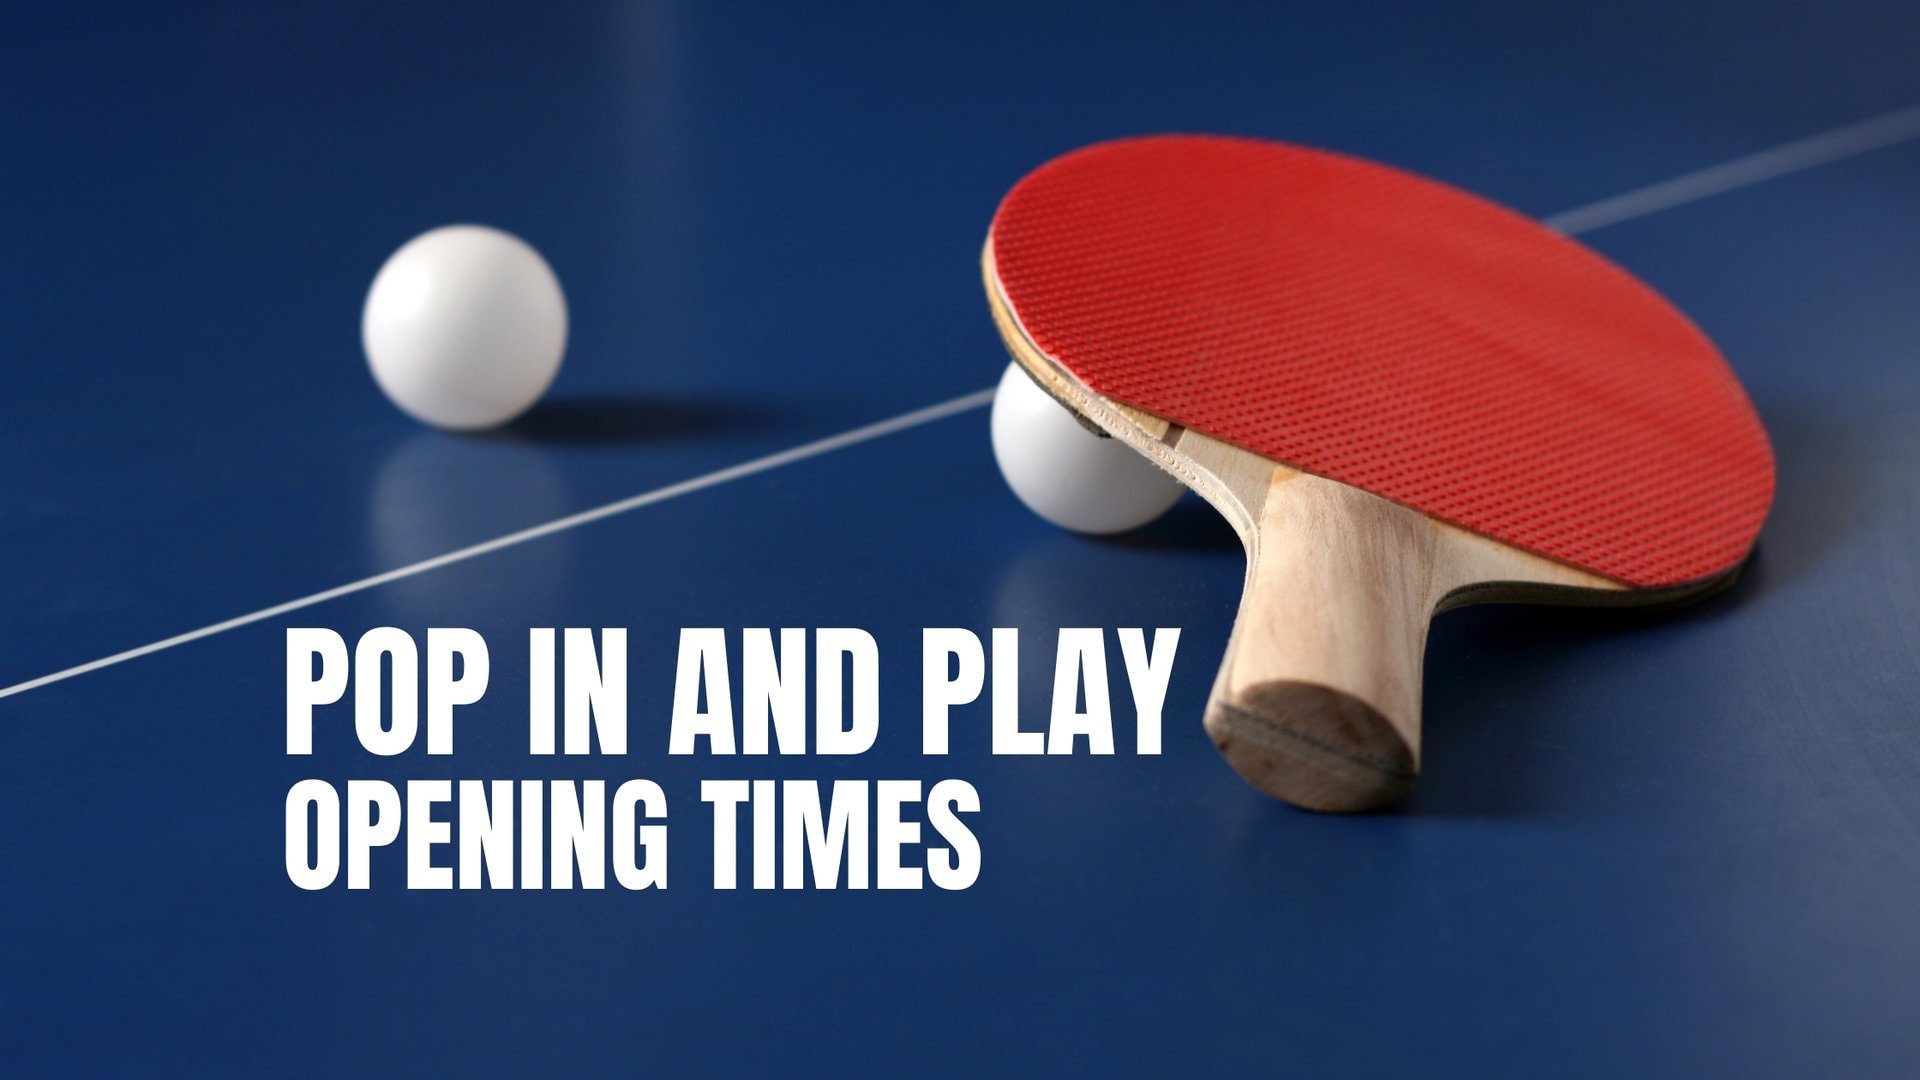 pop in Play Livingston opening times image of table tennis table balls and bat